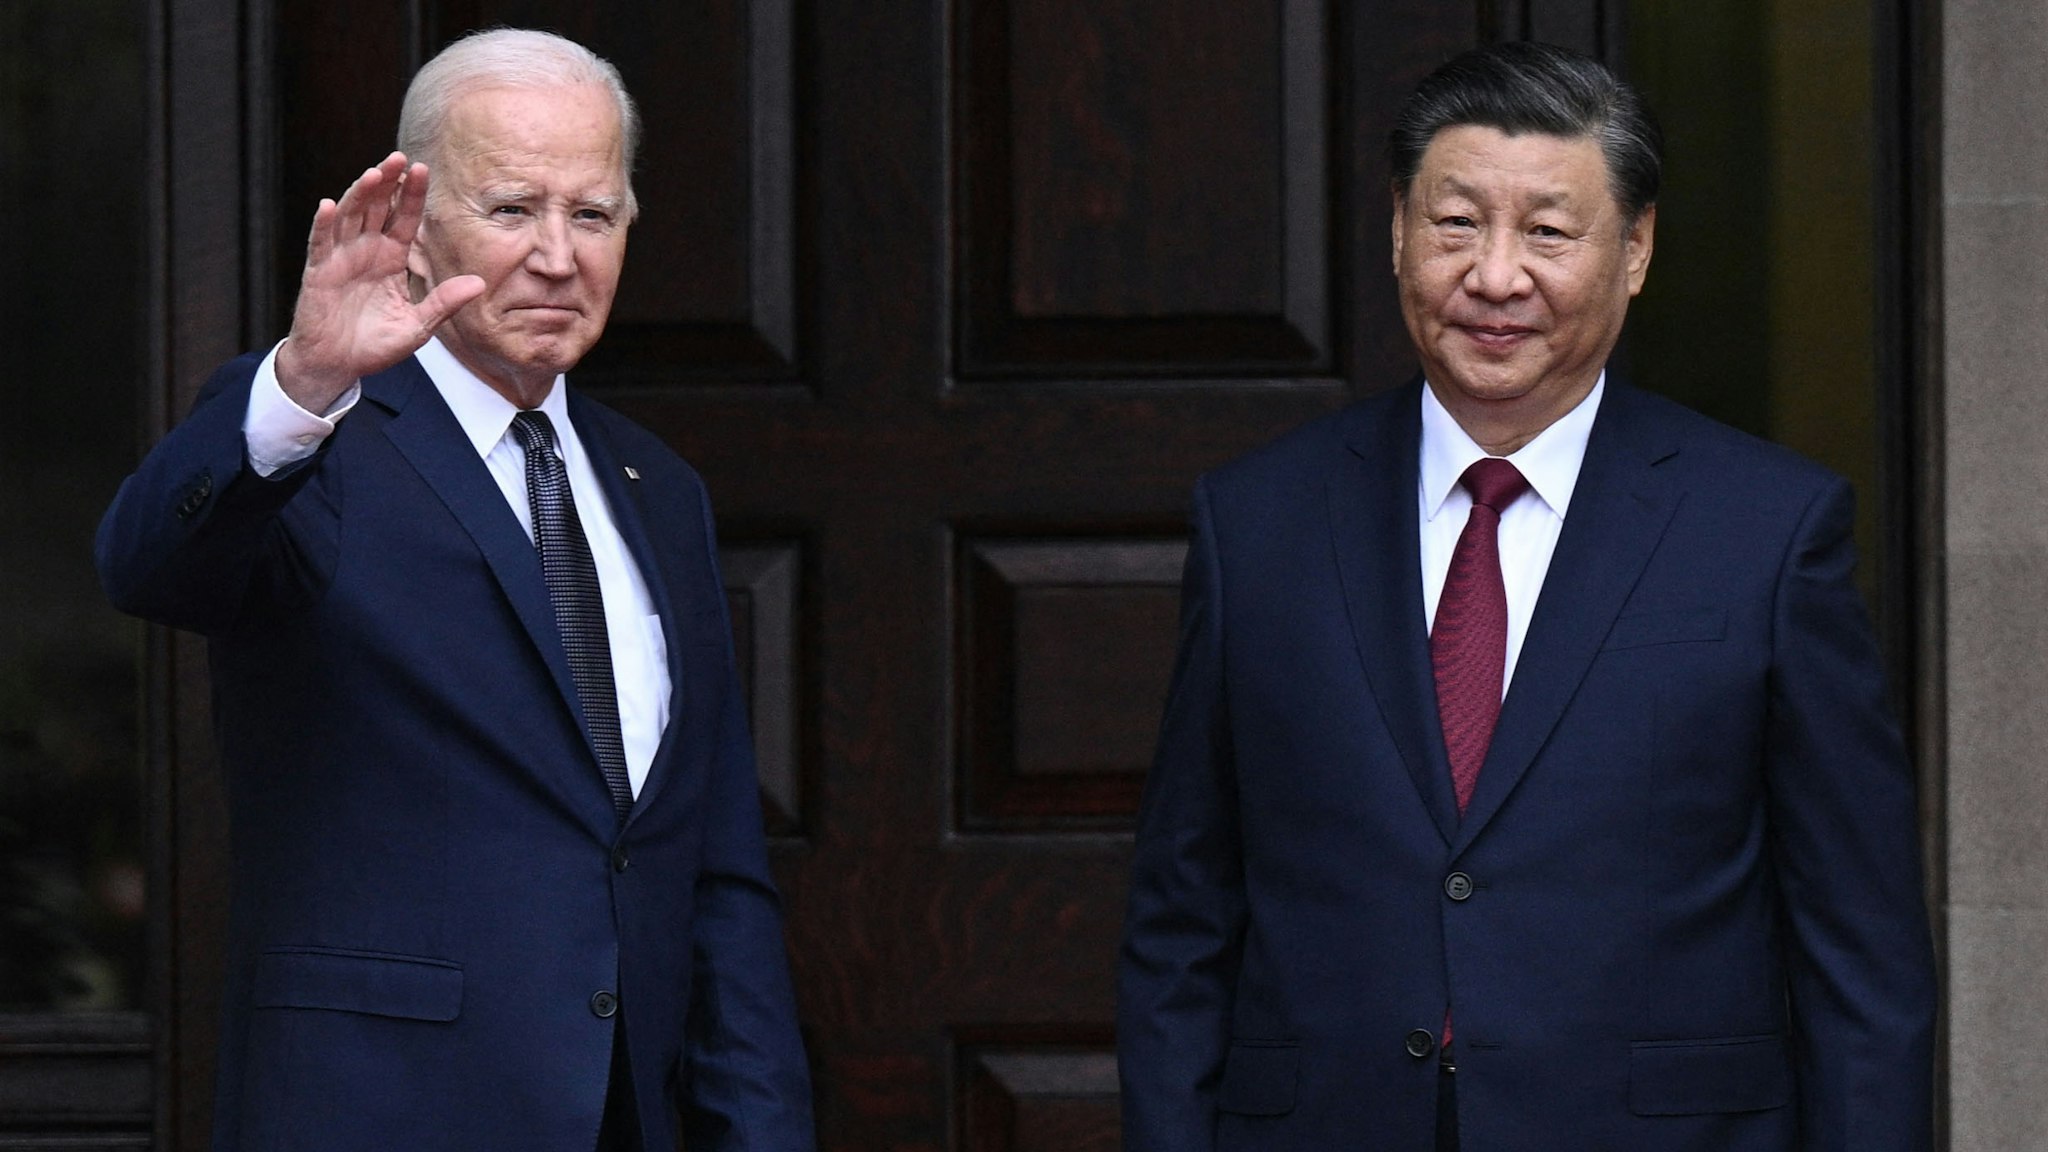 TOPSHOT - US President Joe Biden greets Chinese President Xi Jinping before a meeting during the Asia-Pacific Economic Cooperation (APEC) Leaders' week in Woodside, California on November 15, 2023. Biden and Xi will try to prevent the superpowers' rivalry spilling into conflict when they meet for the first time in a year at a high-stakes summit in San Francisco on Wednesday. With tensions soaring over issues including Taiwan, sanctions and trade, the leaders of the world's largest economies are expected to hold at least three hours of talks at the Filoli country estate on the city's outskirts.